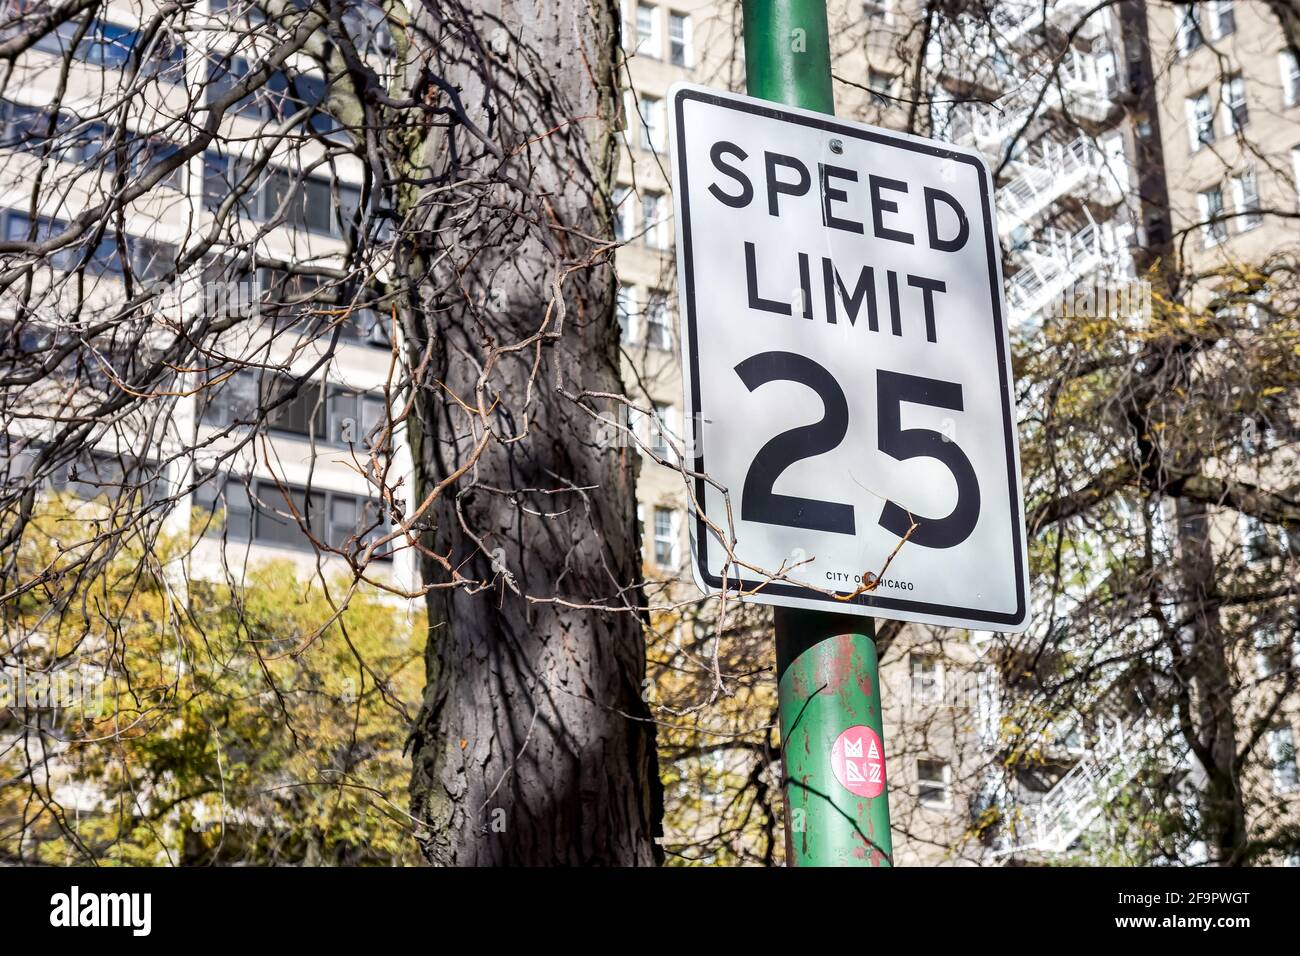 25 mph speed limit traffic sign in a residential neighborhood in Chicago Illinois, USA. Stock Photo